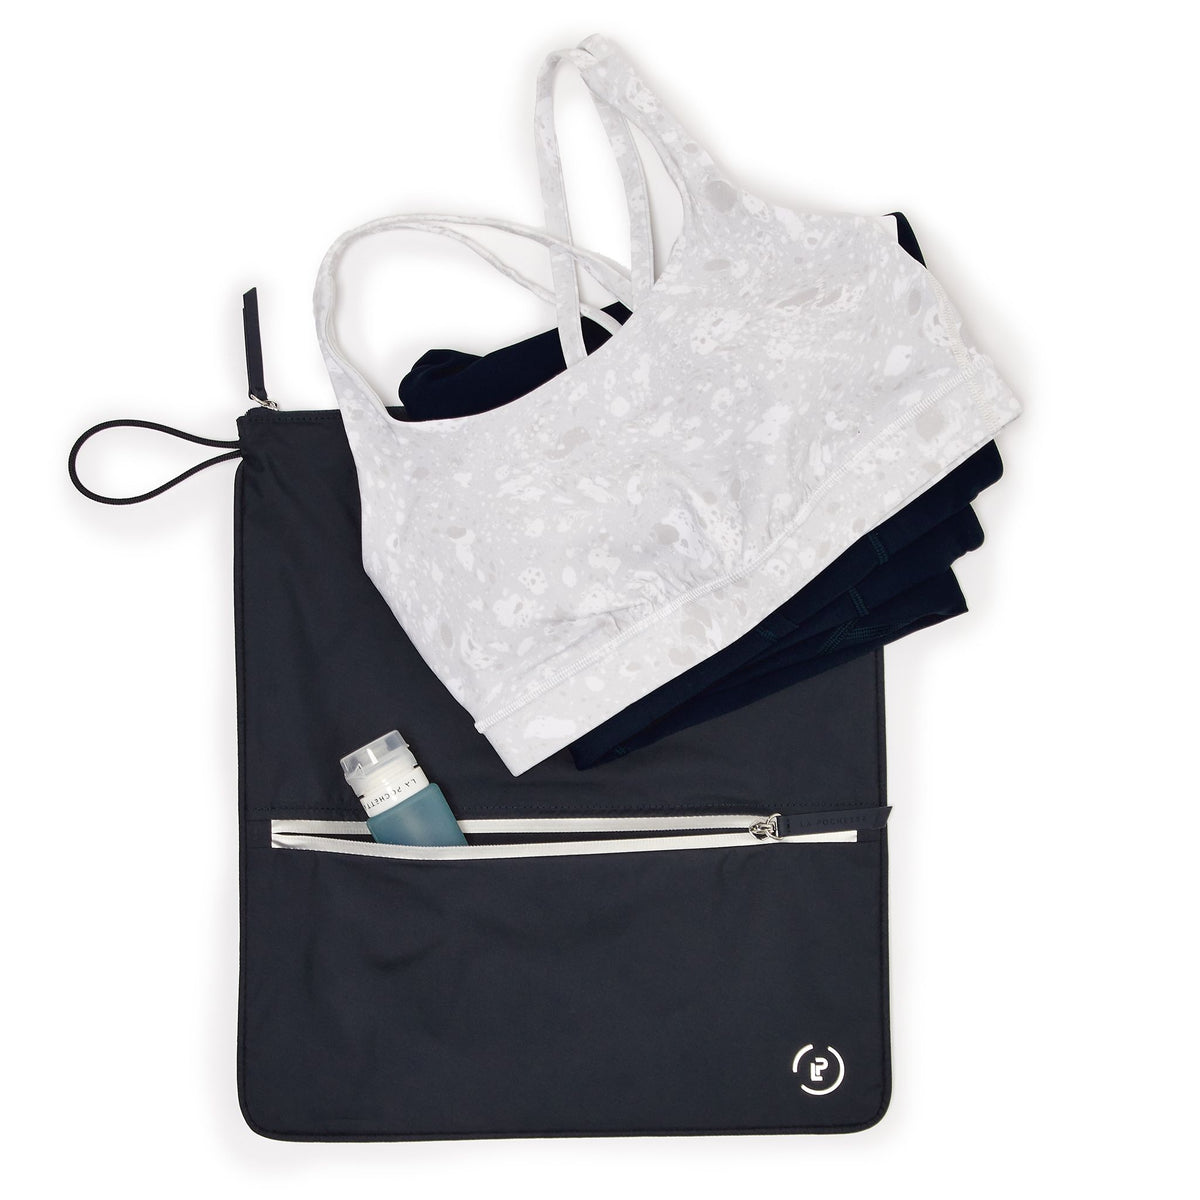 Midnight Silver Sweat bag laying flat, with front pocket open with a la Pochette travel bottle in it, and workout kit on top of sweat bag